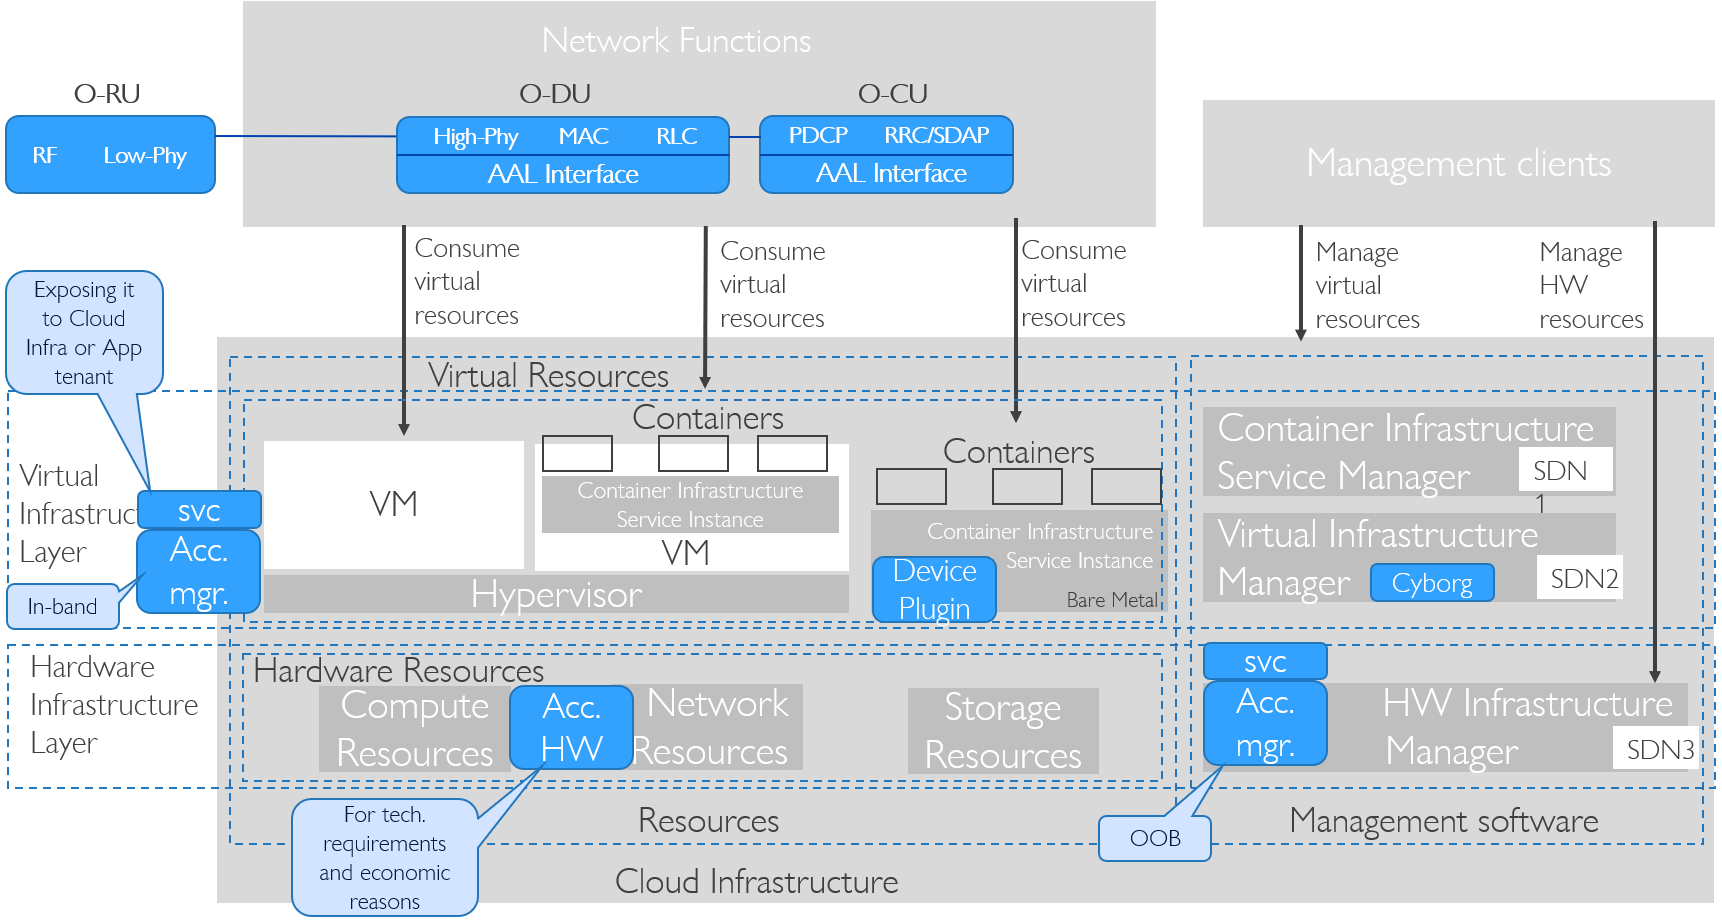 AAL Interface in RM Realization Diagram